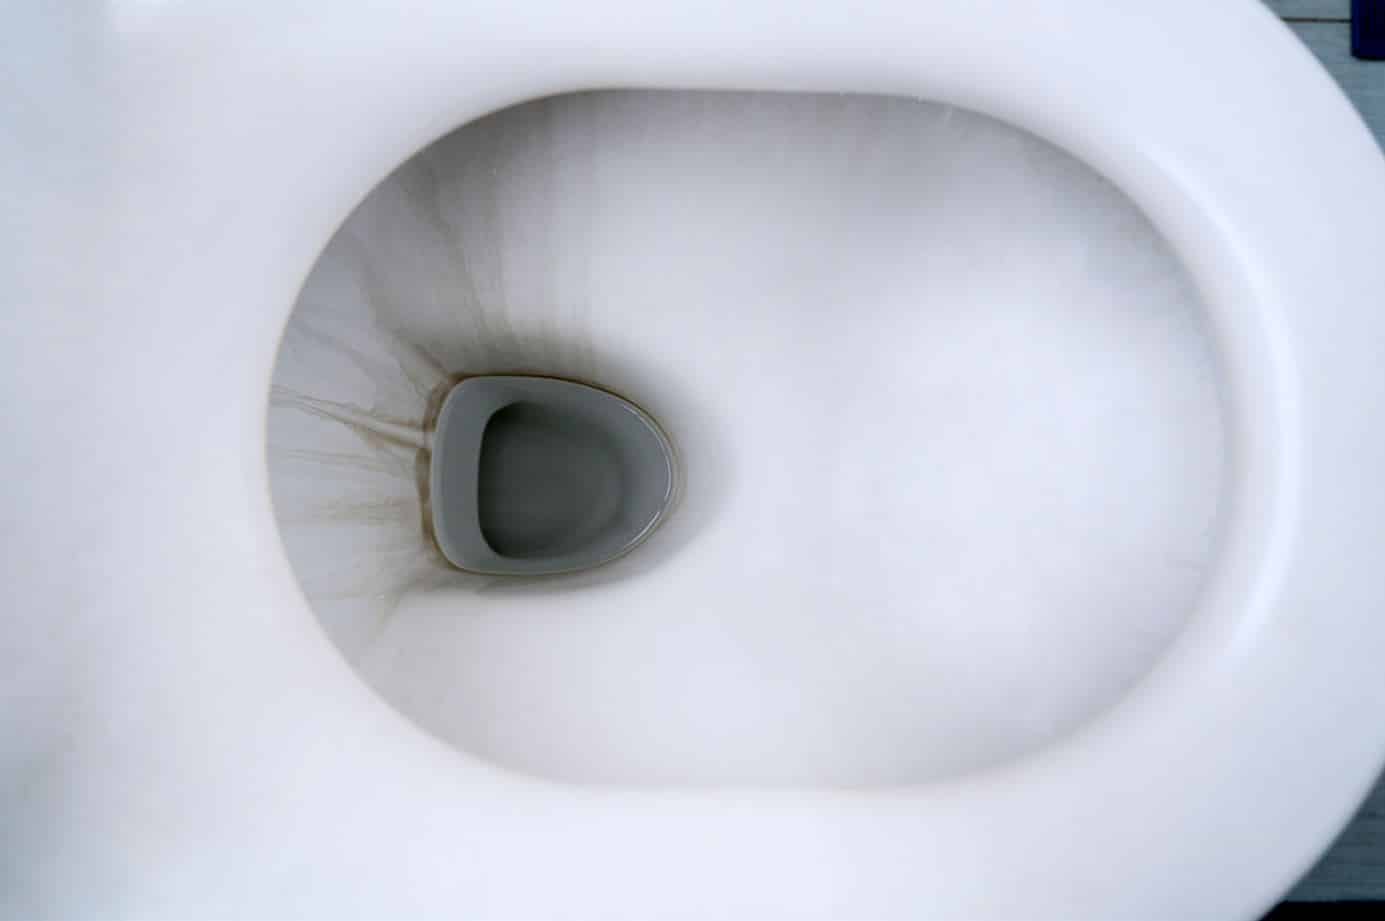 How Do You Remove Hard Water Stains From Toilet Bowl